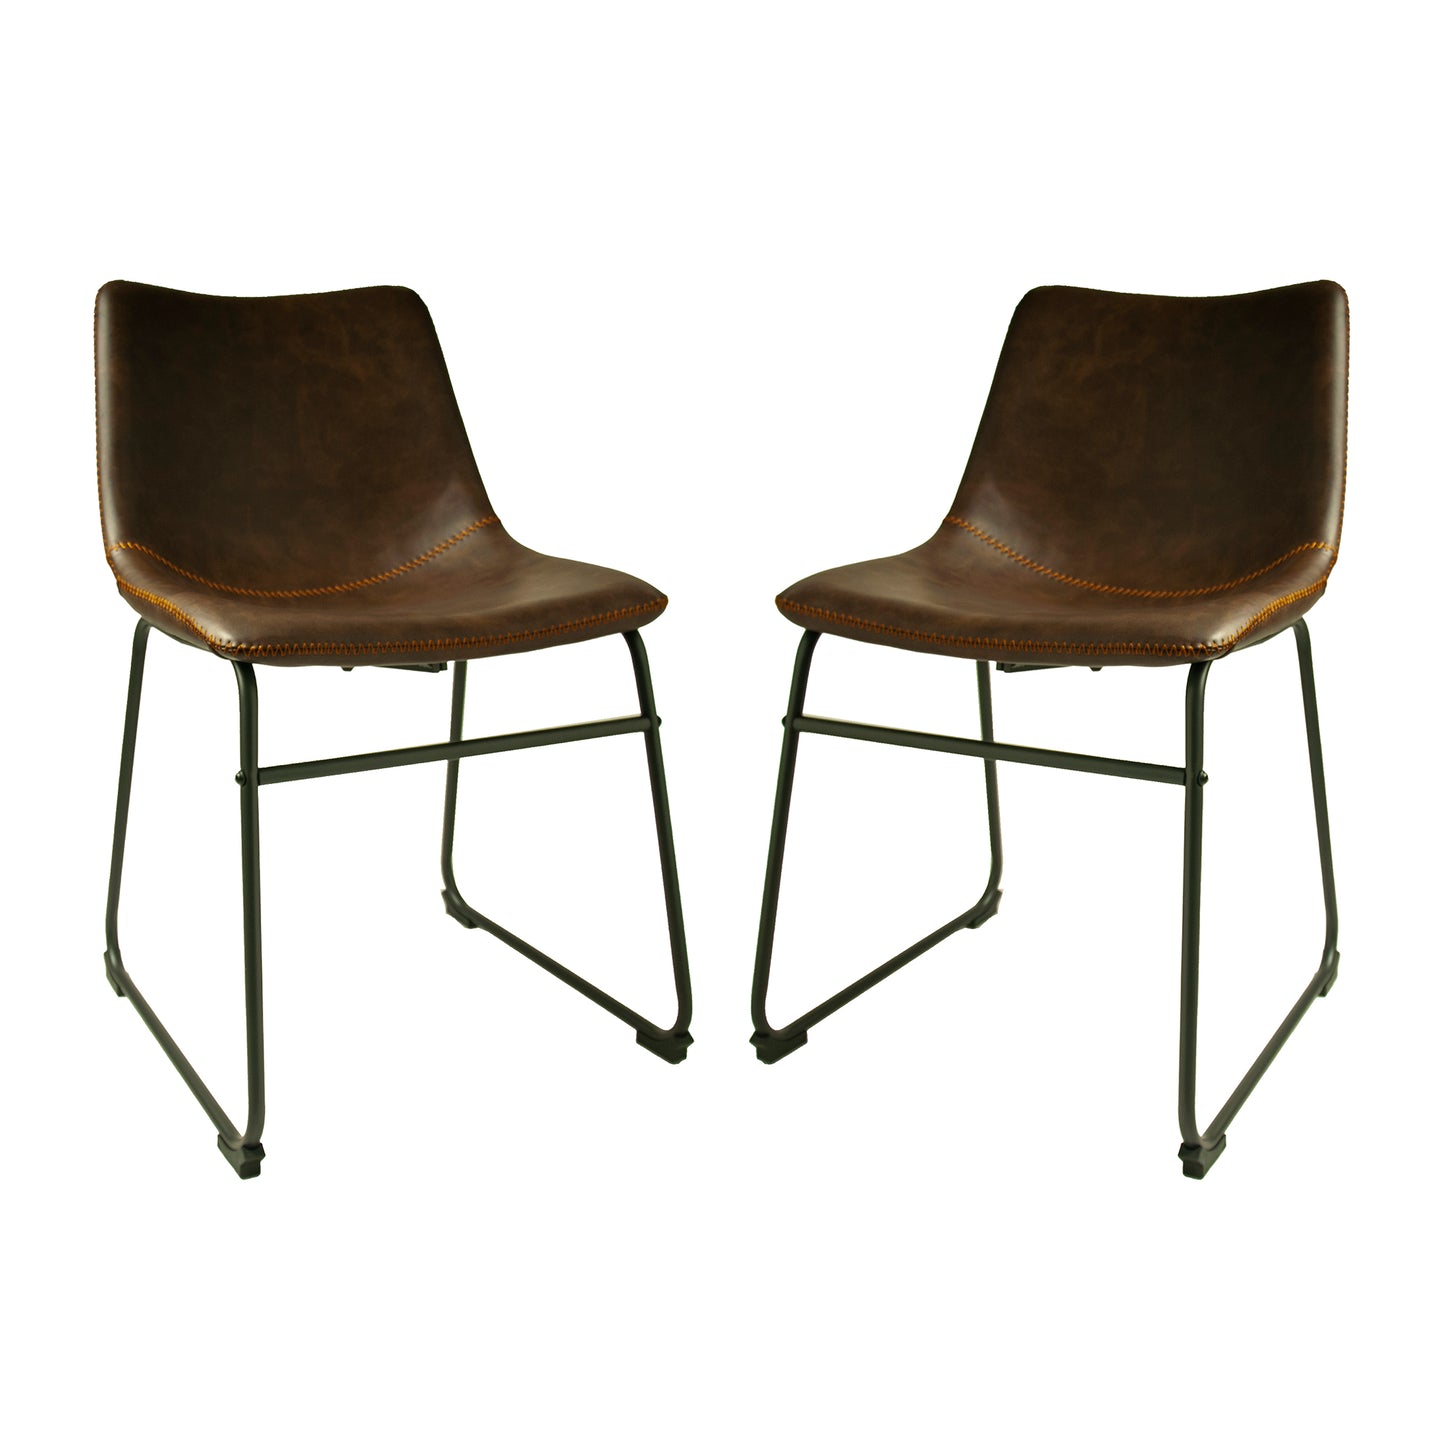 Pair of Chestnut Cooper Vegan Leather Dining Chairs